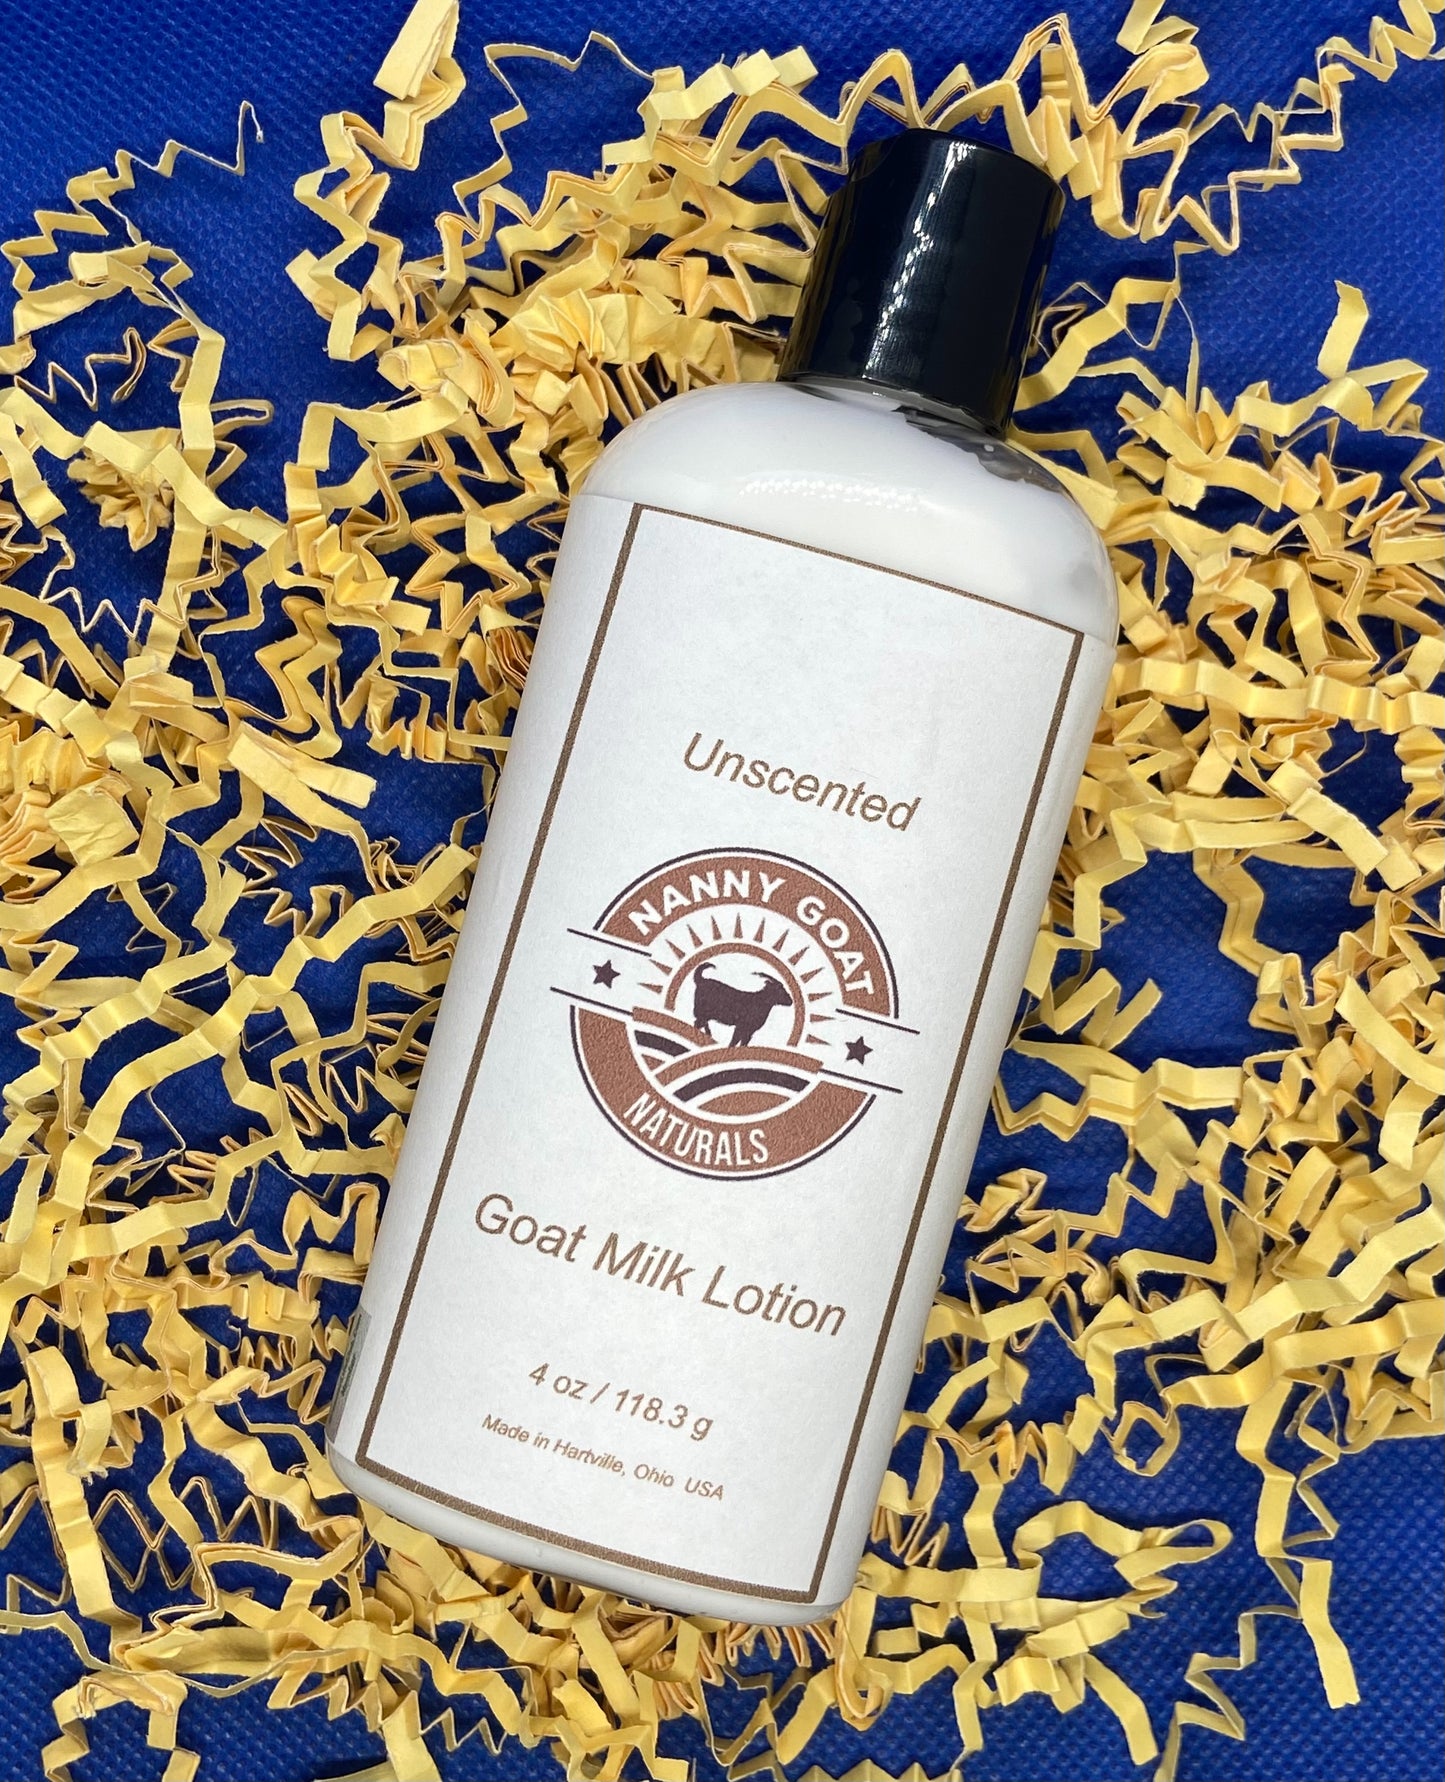 Unscented Goat Milk Lotion